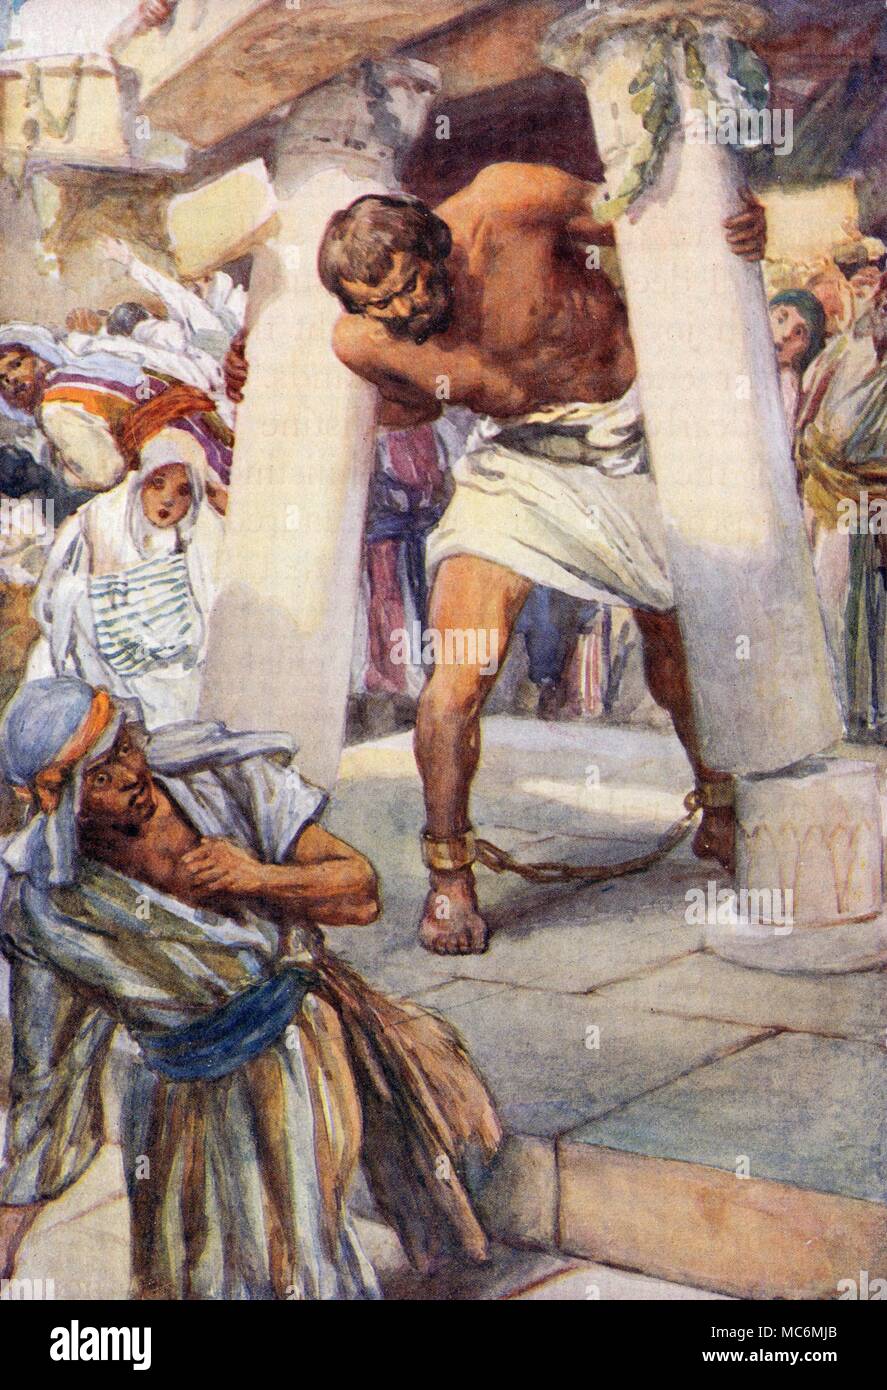 CHRISTIAN - OLD TESTAMENT - JEWISH MYTH - SAMSON 'He bowed himself with all his might' - blind Samson pulling down the house of the Philistines. Illustration by Arthur Dixon for Theodora W. Wilson, The Old Testament Story, 1926. Stock Photo